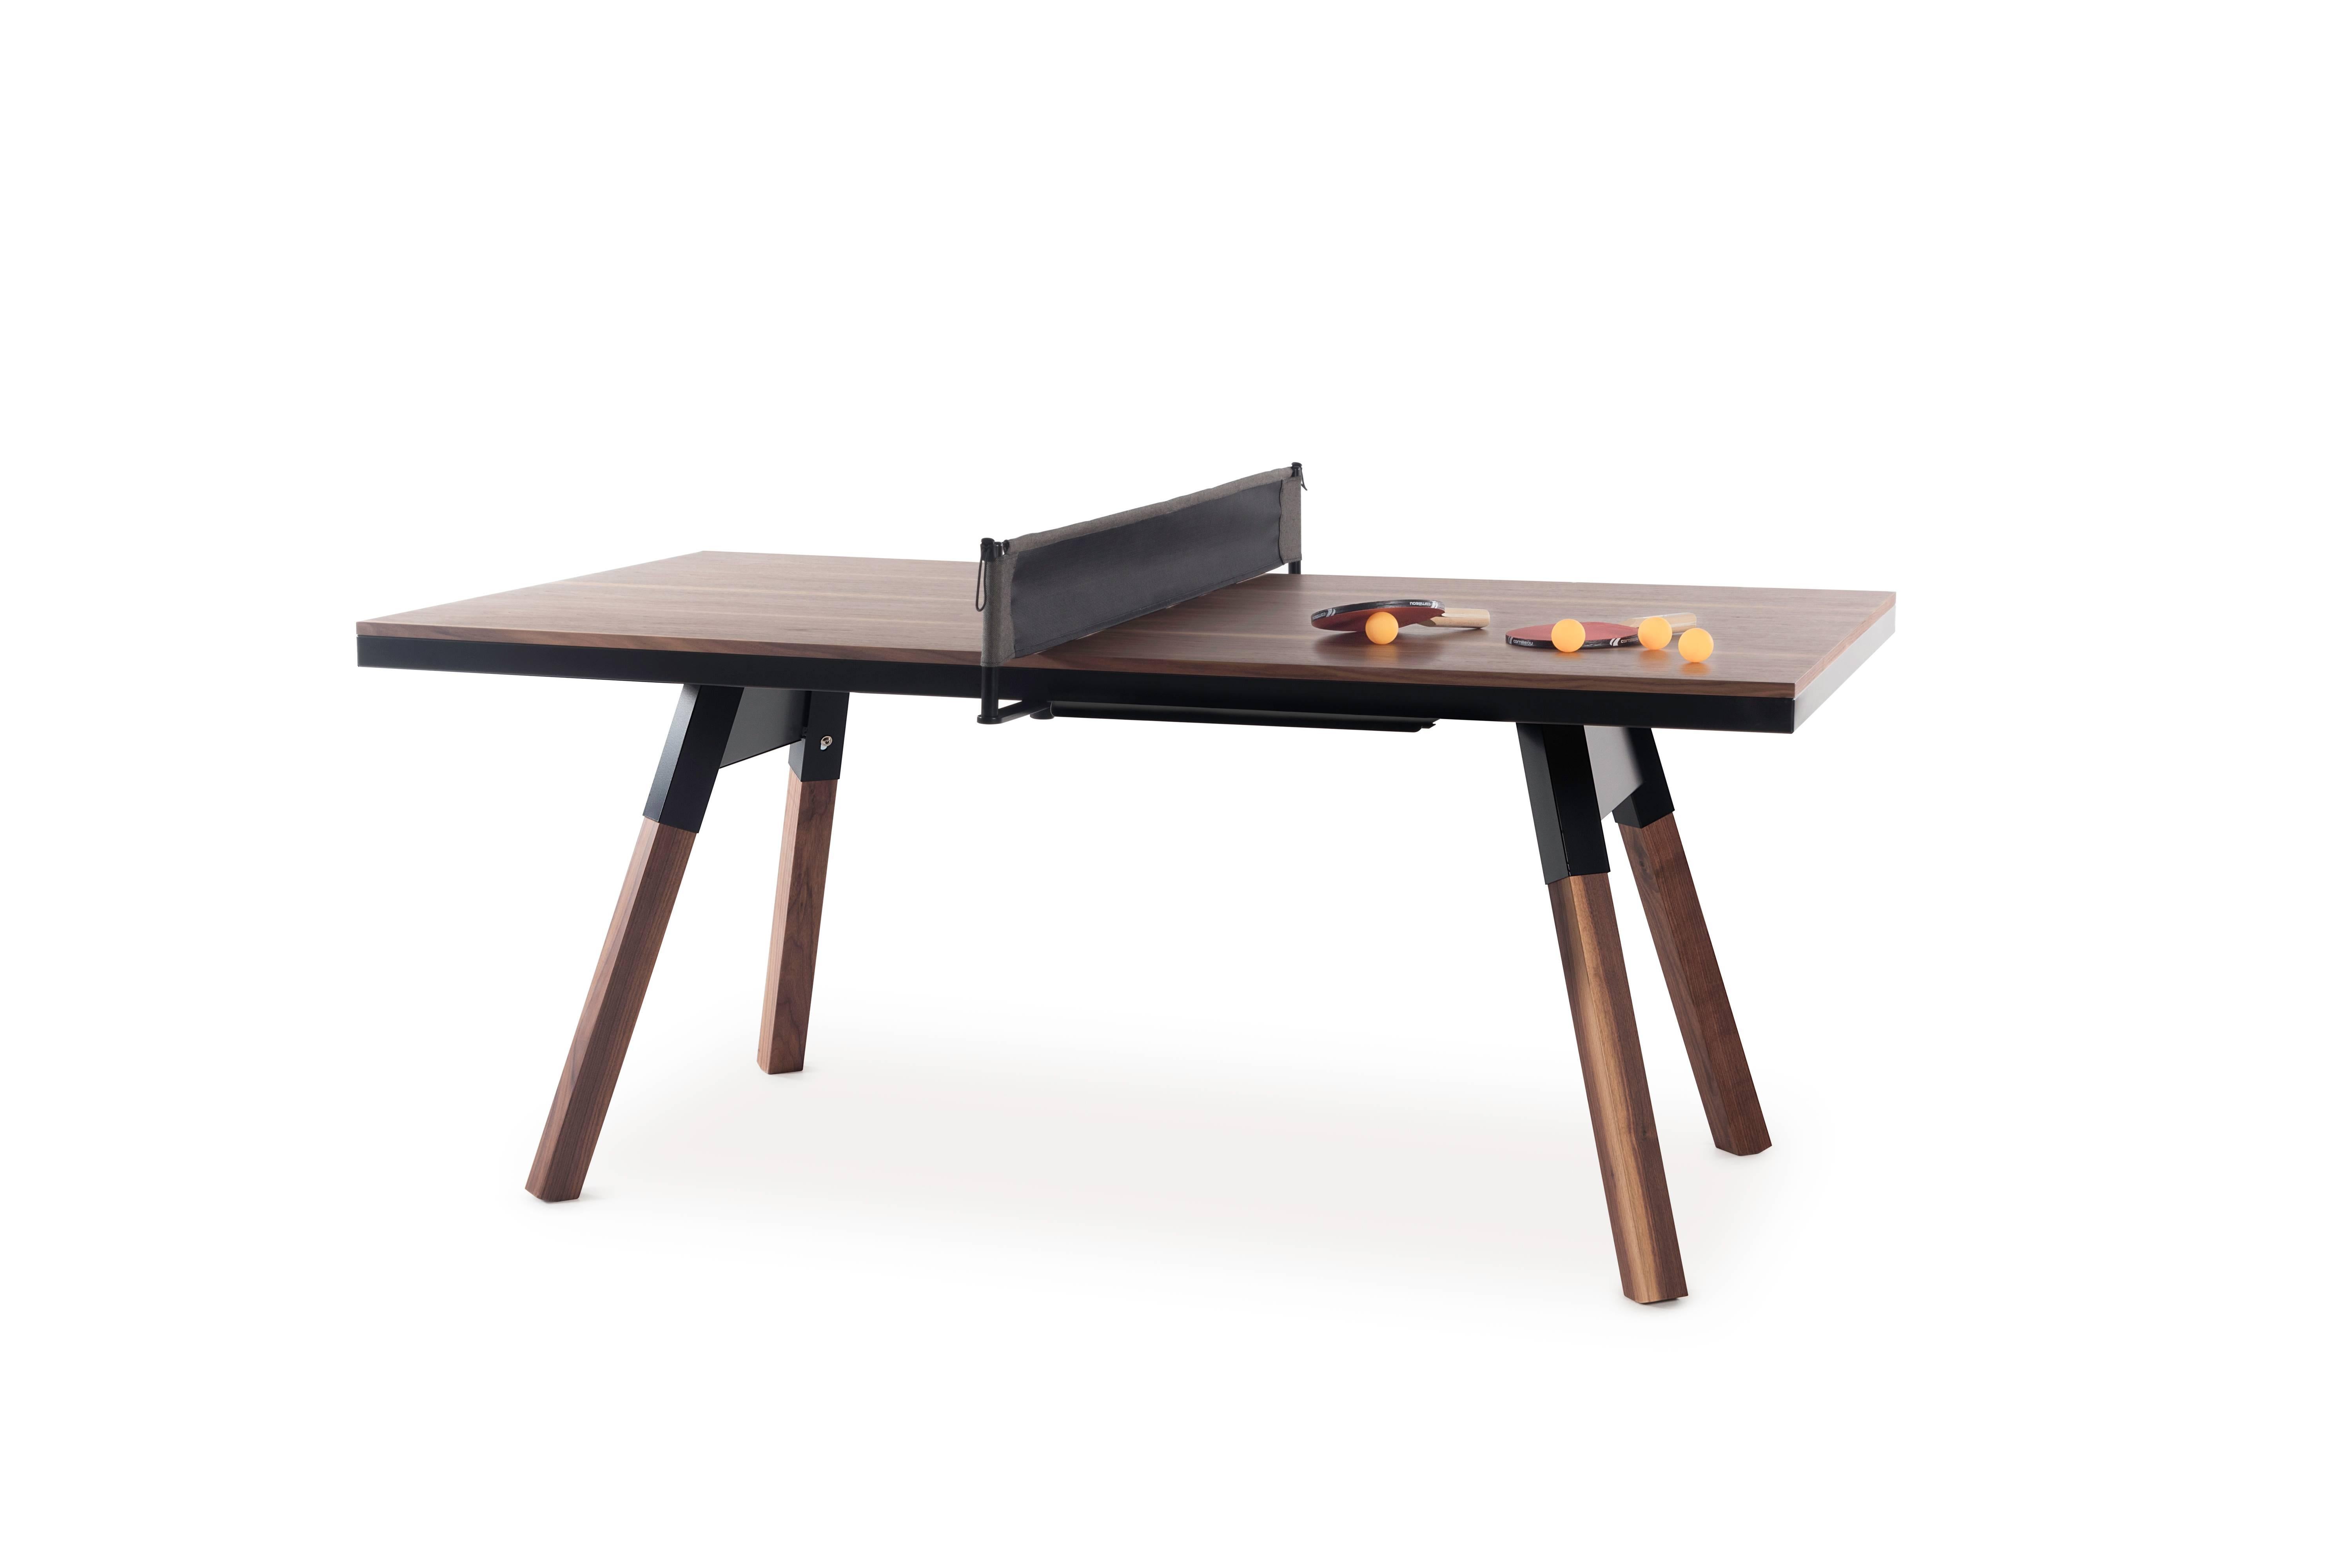 With our wood topped Small You and Me ping-pong table, we’ve taken our playful attitude indoors. Wood offers comfort and elegance, while sportiness blends in seamlessly in new settings. There’s a place for everything with a You and Me. There’s a